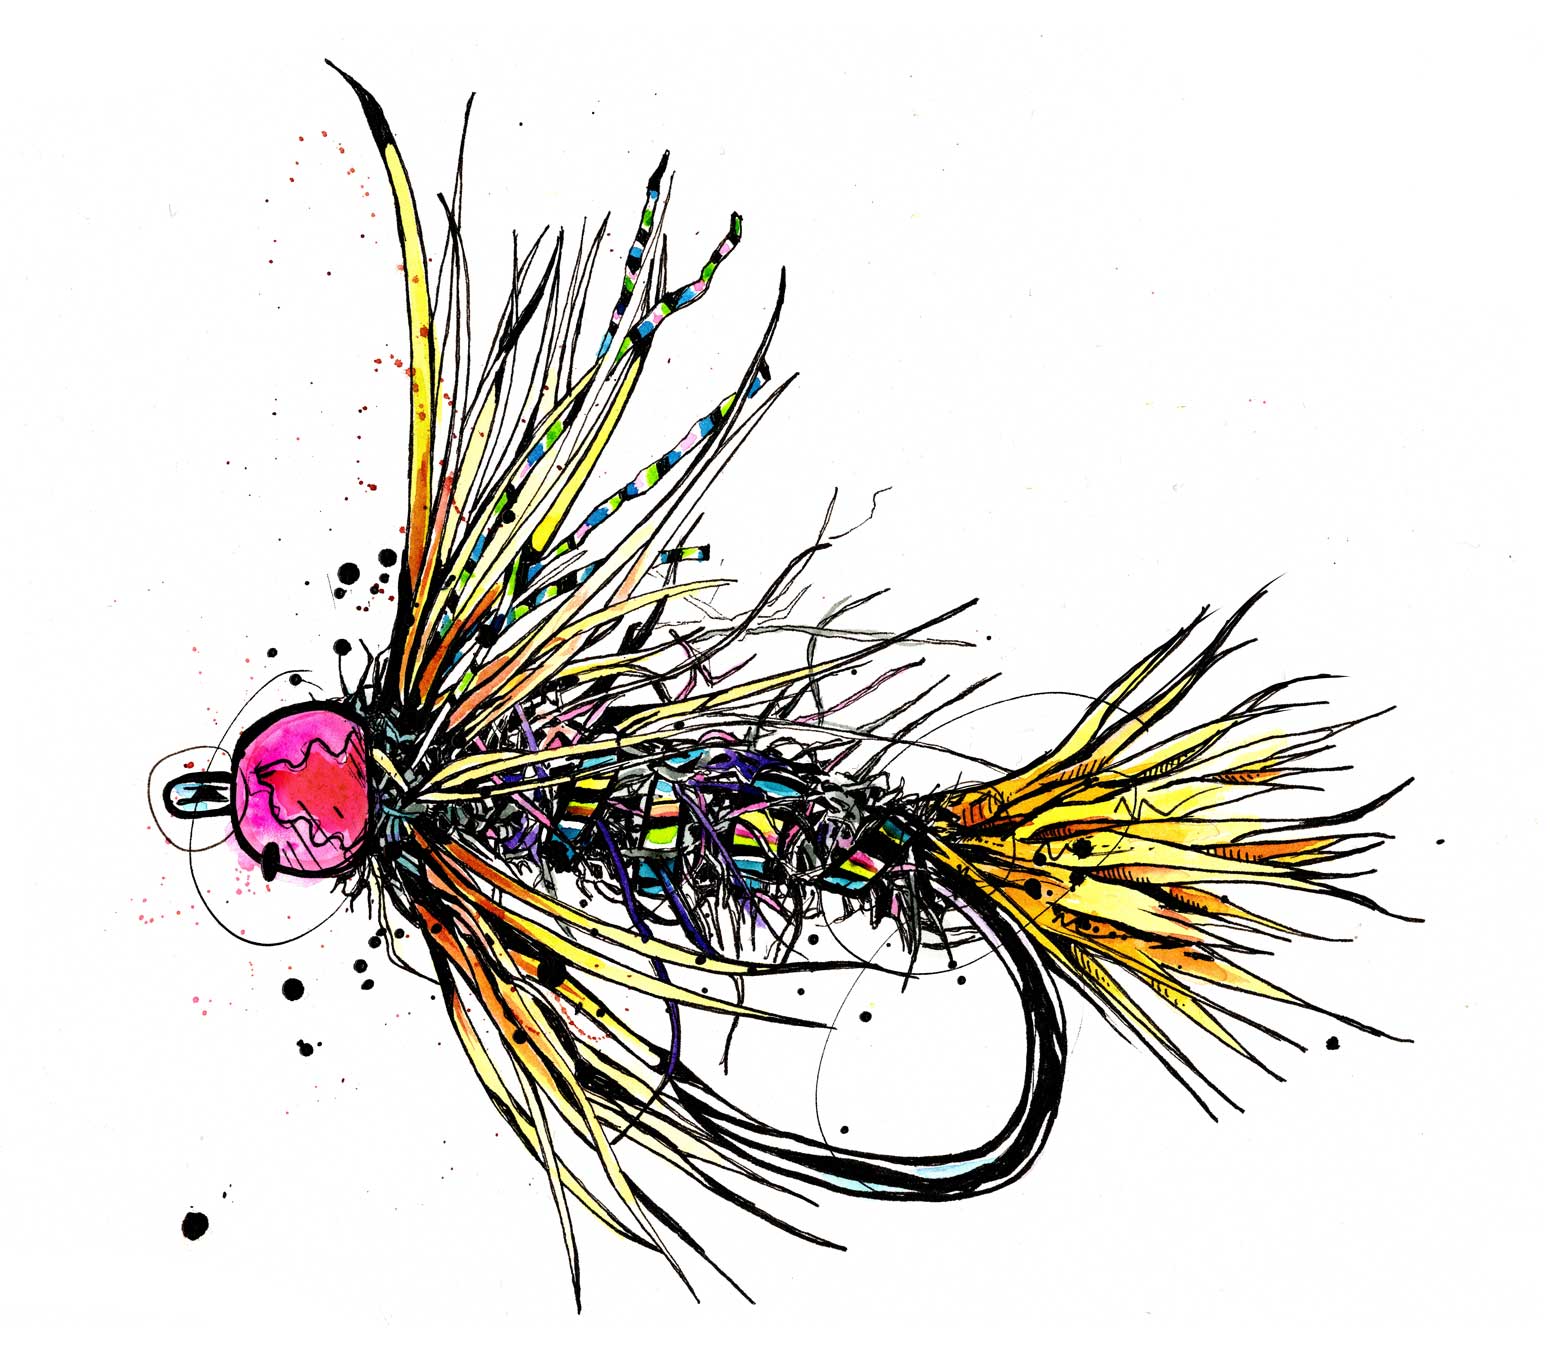 Implements and Approaches: The Art of Ryan Keene - The FlyFish Journal